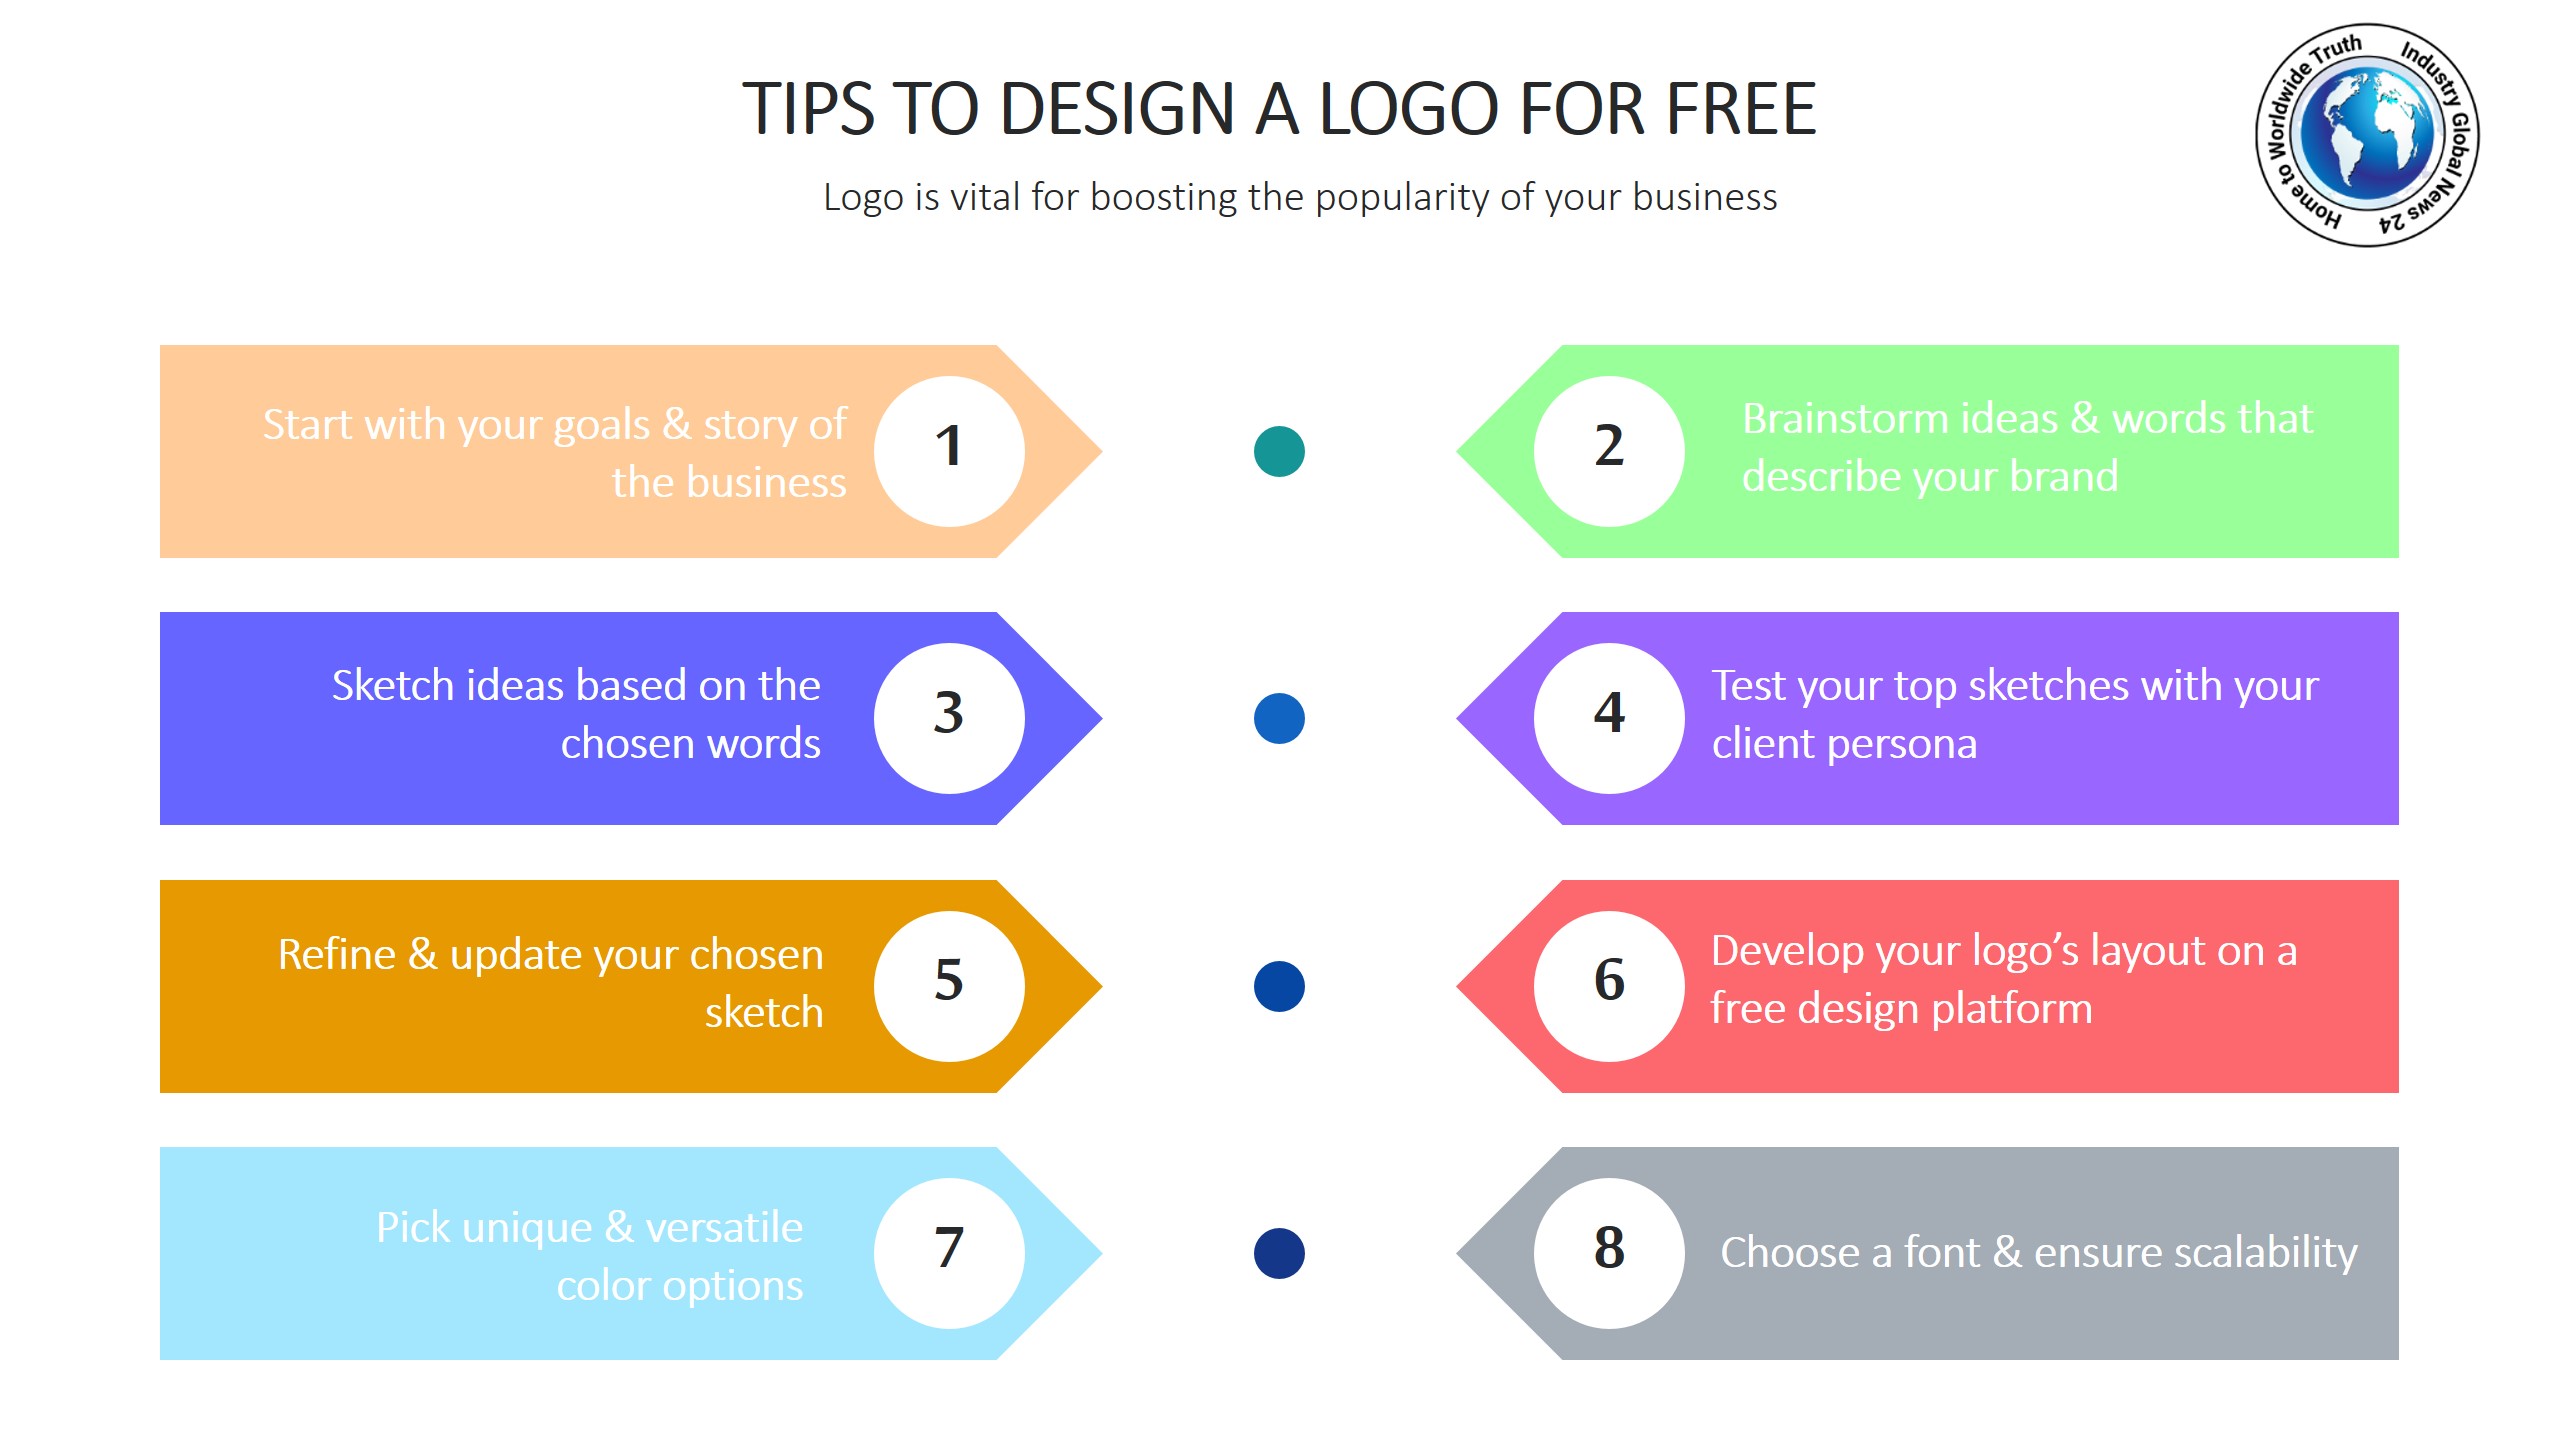 Tips to design a logo for free